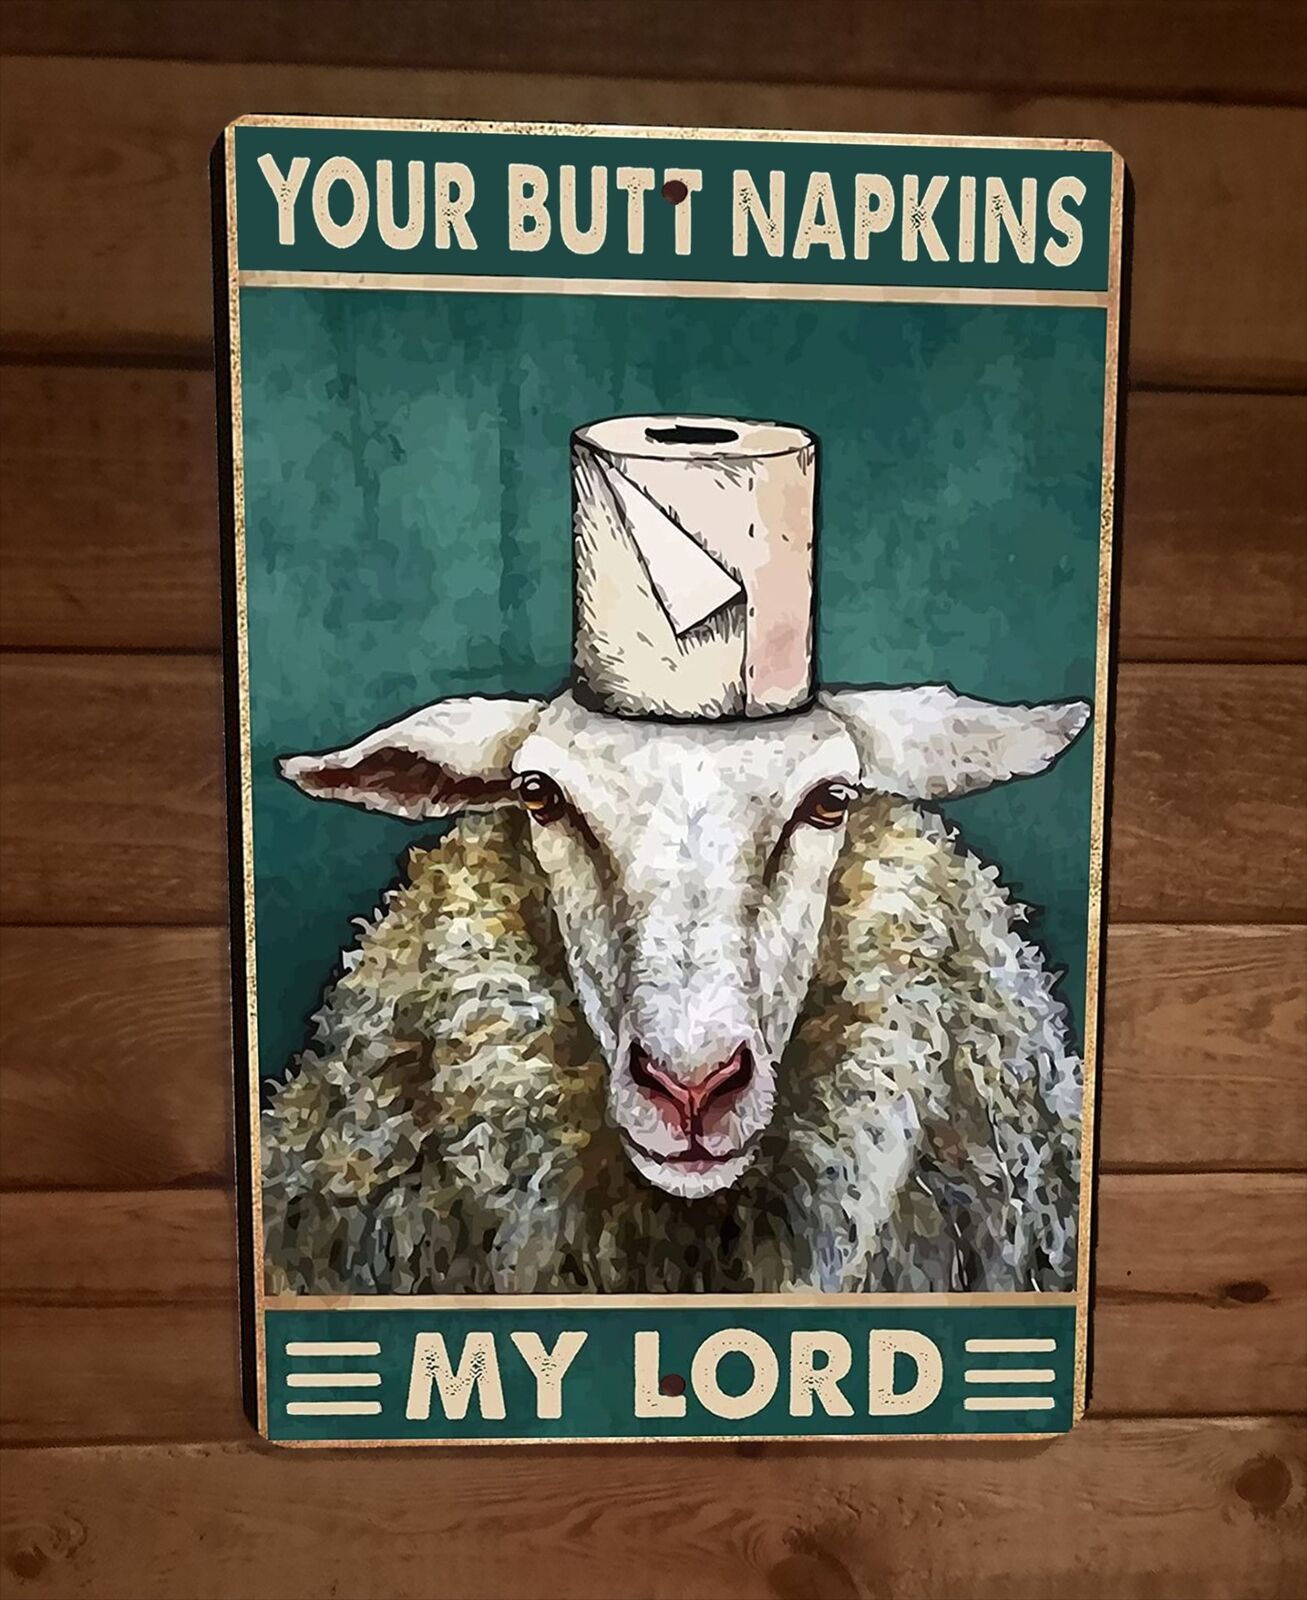 Your Butt Napkins My Lord Sheep 8x12 Metal Wall Sign Animal Poster